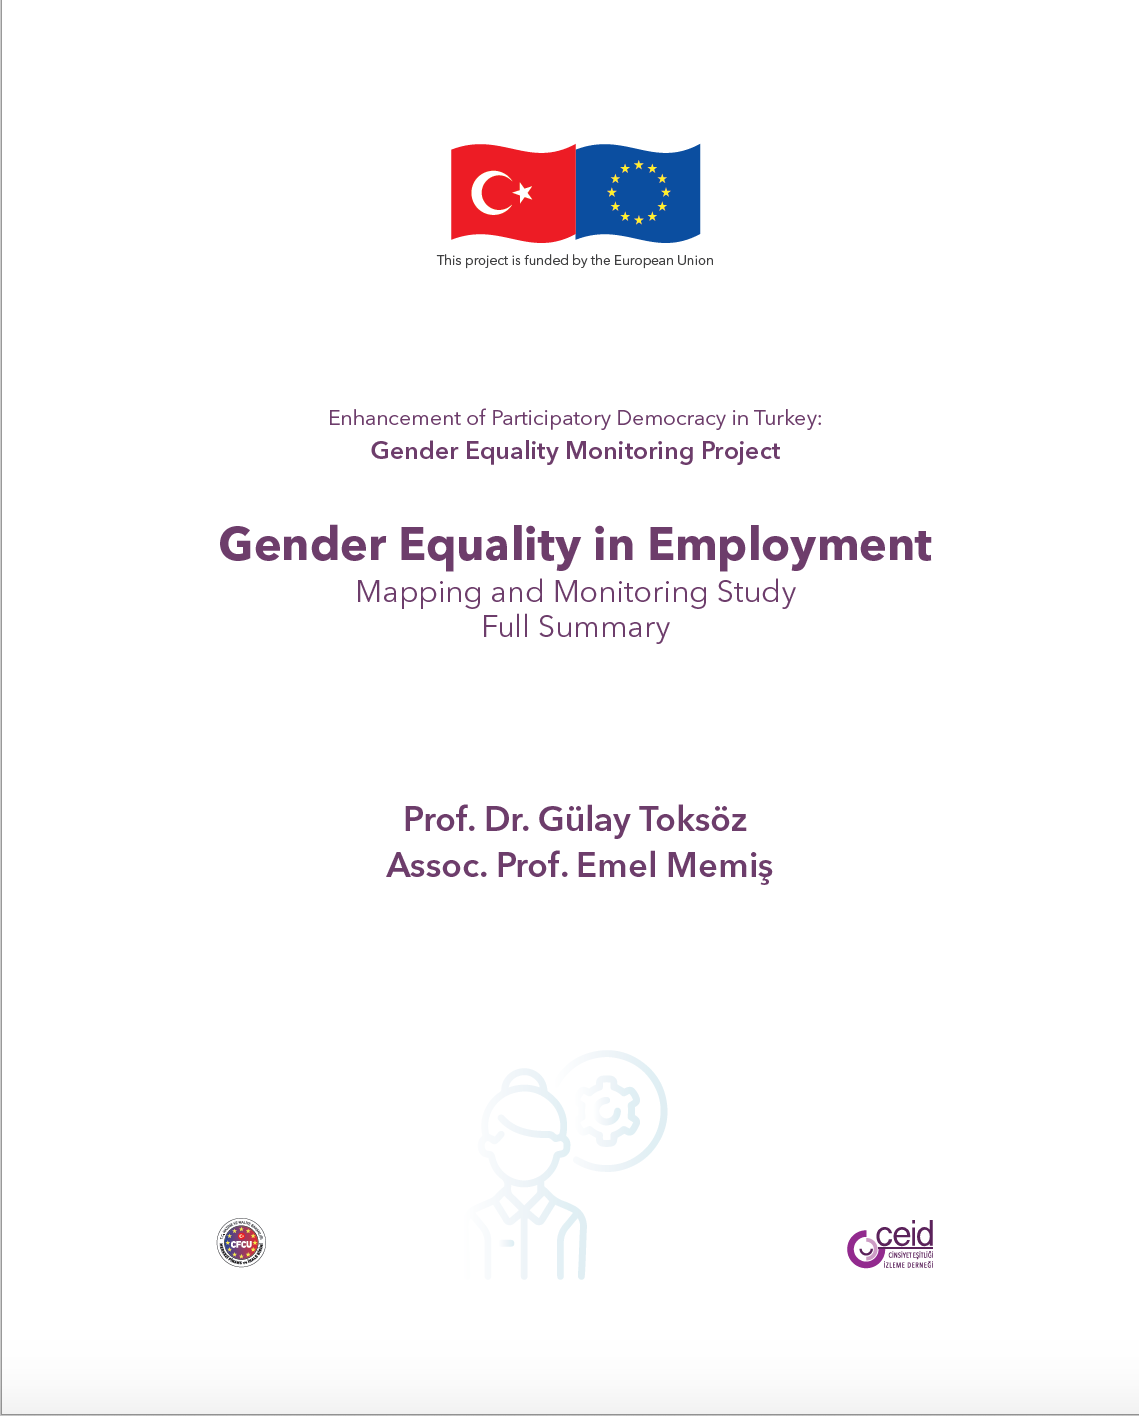 Gender Equality in Employment